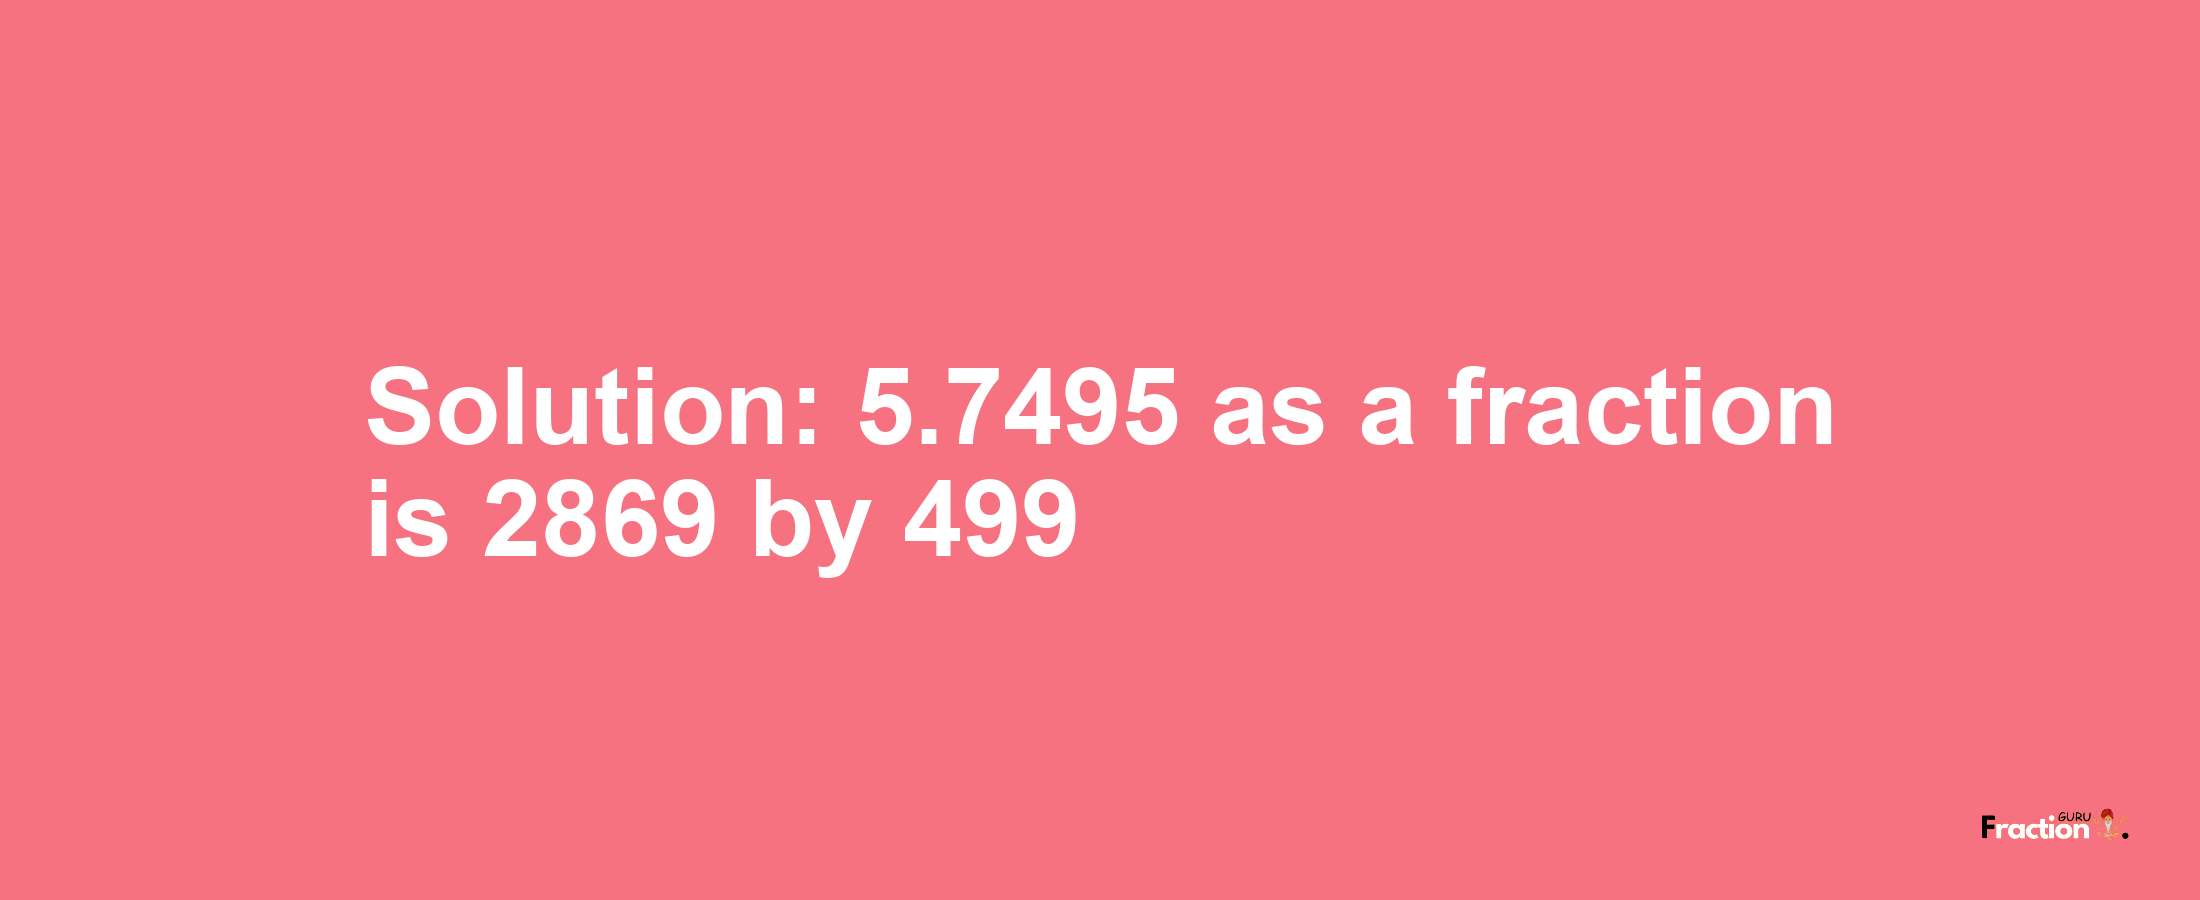 Solution:5.7495 as a fraction is 2869/499